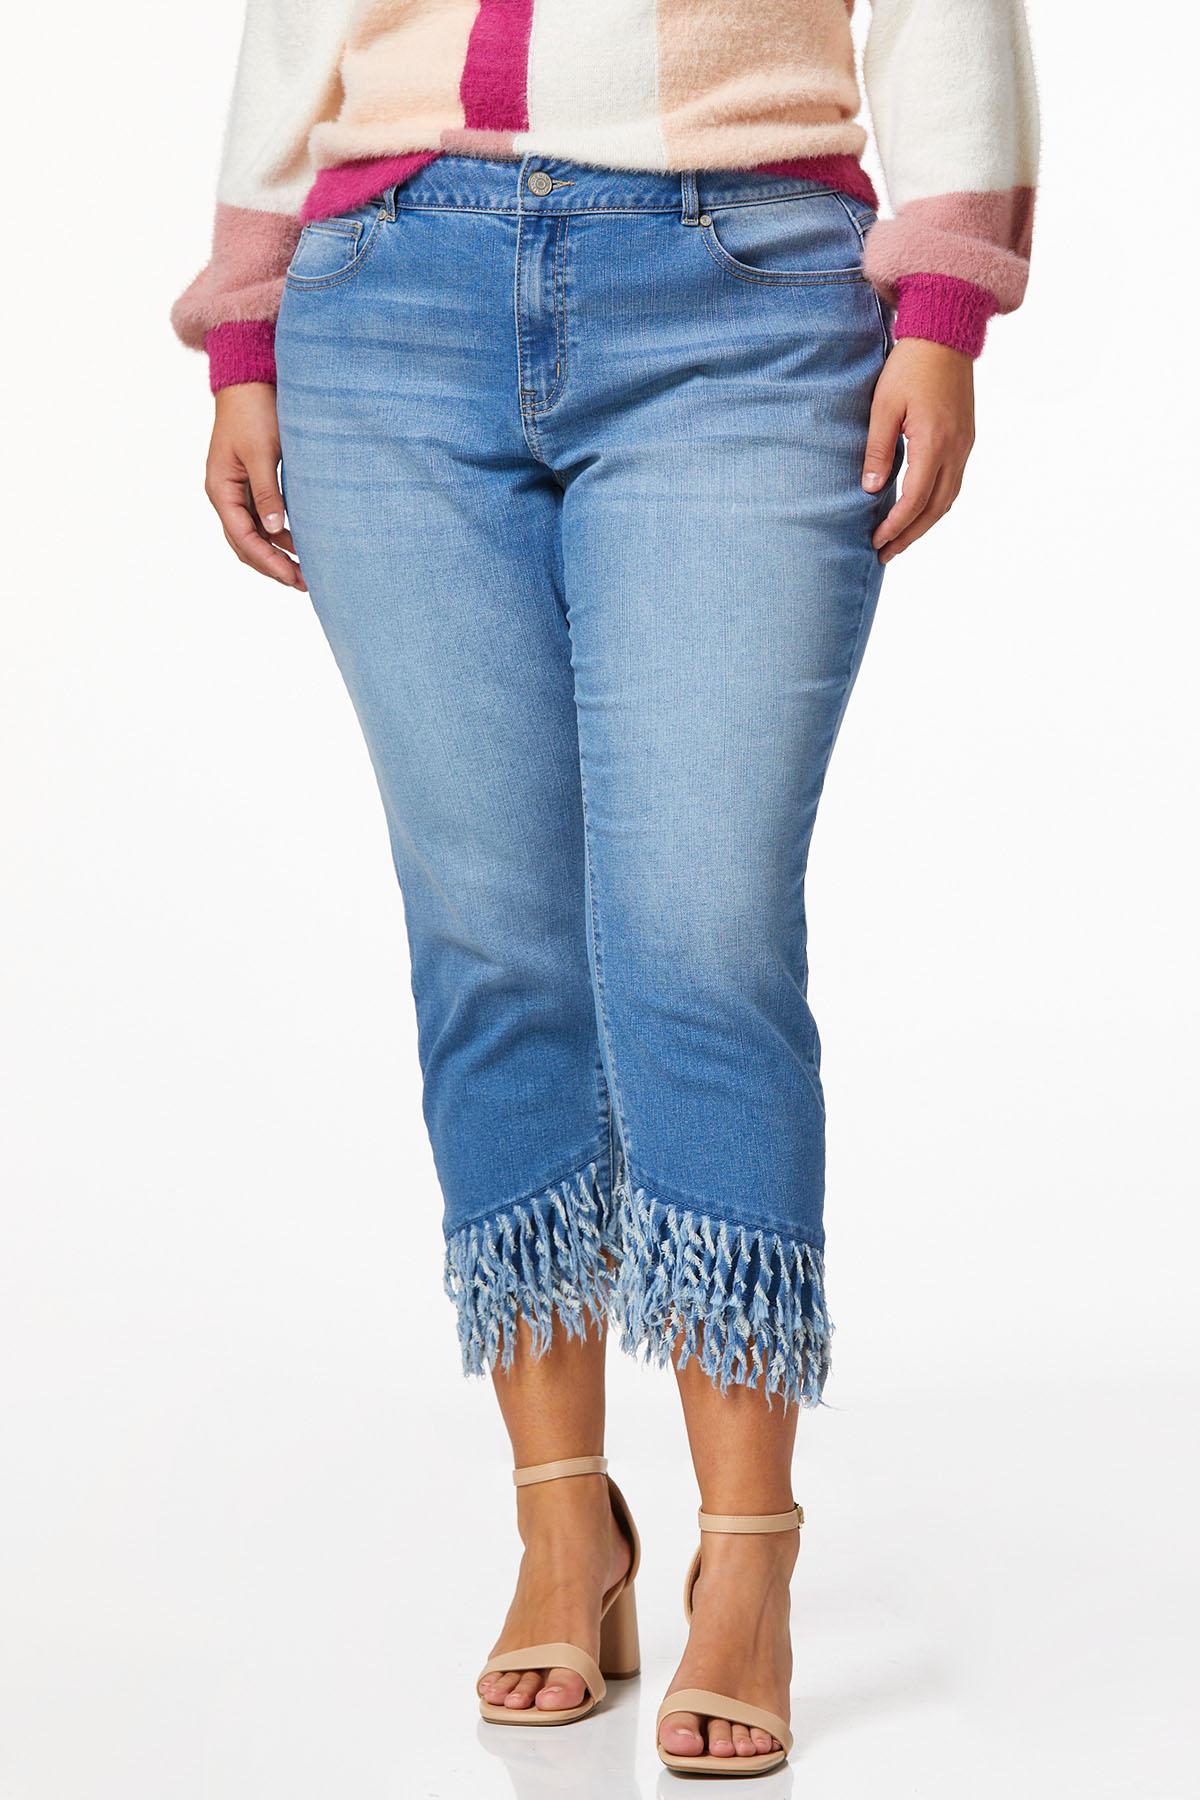 Cato Fashions  Cato Plus Size Cropped Twisty Fringe Jeans